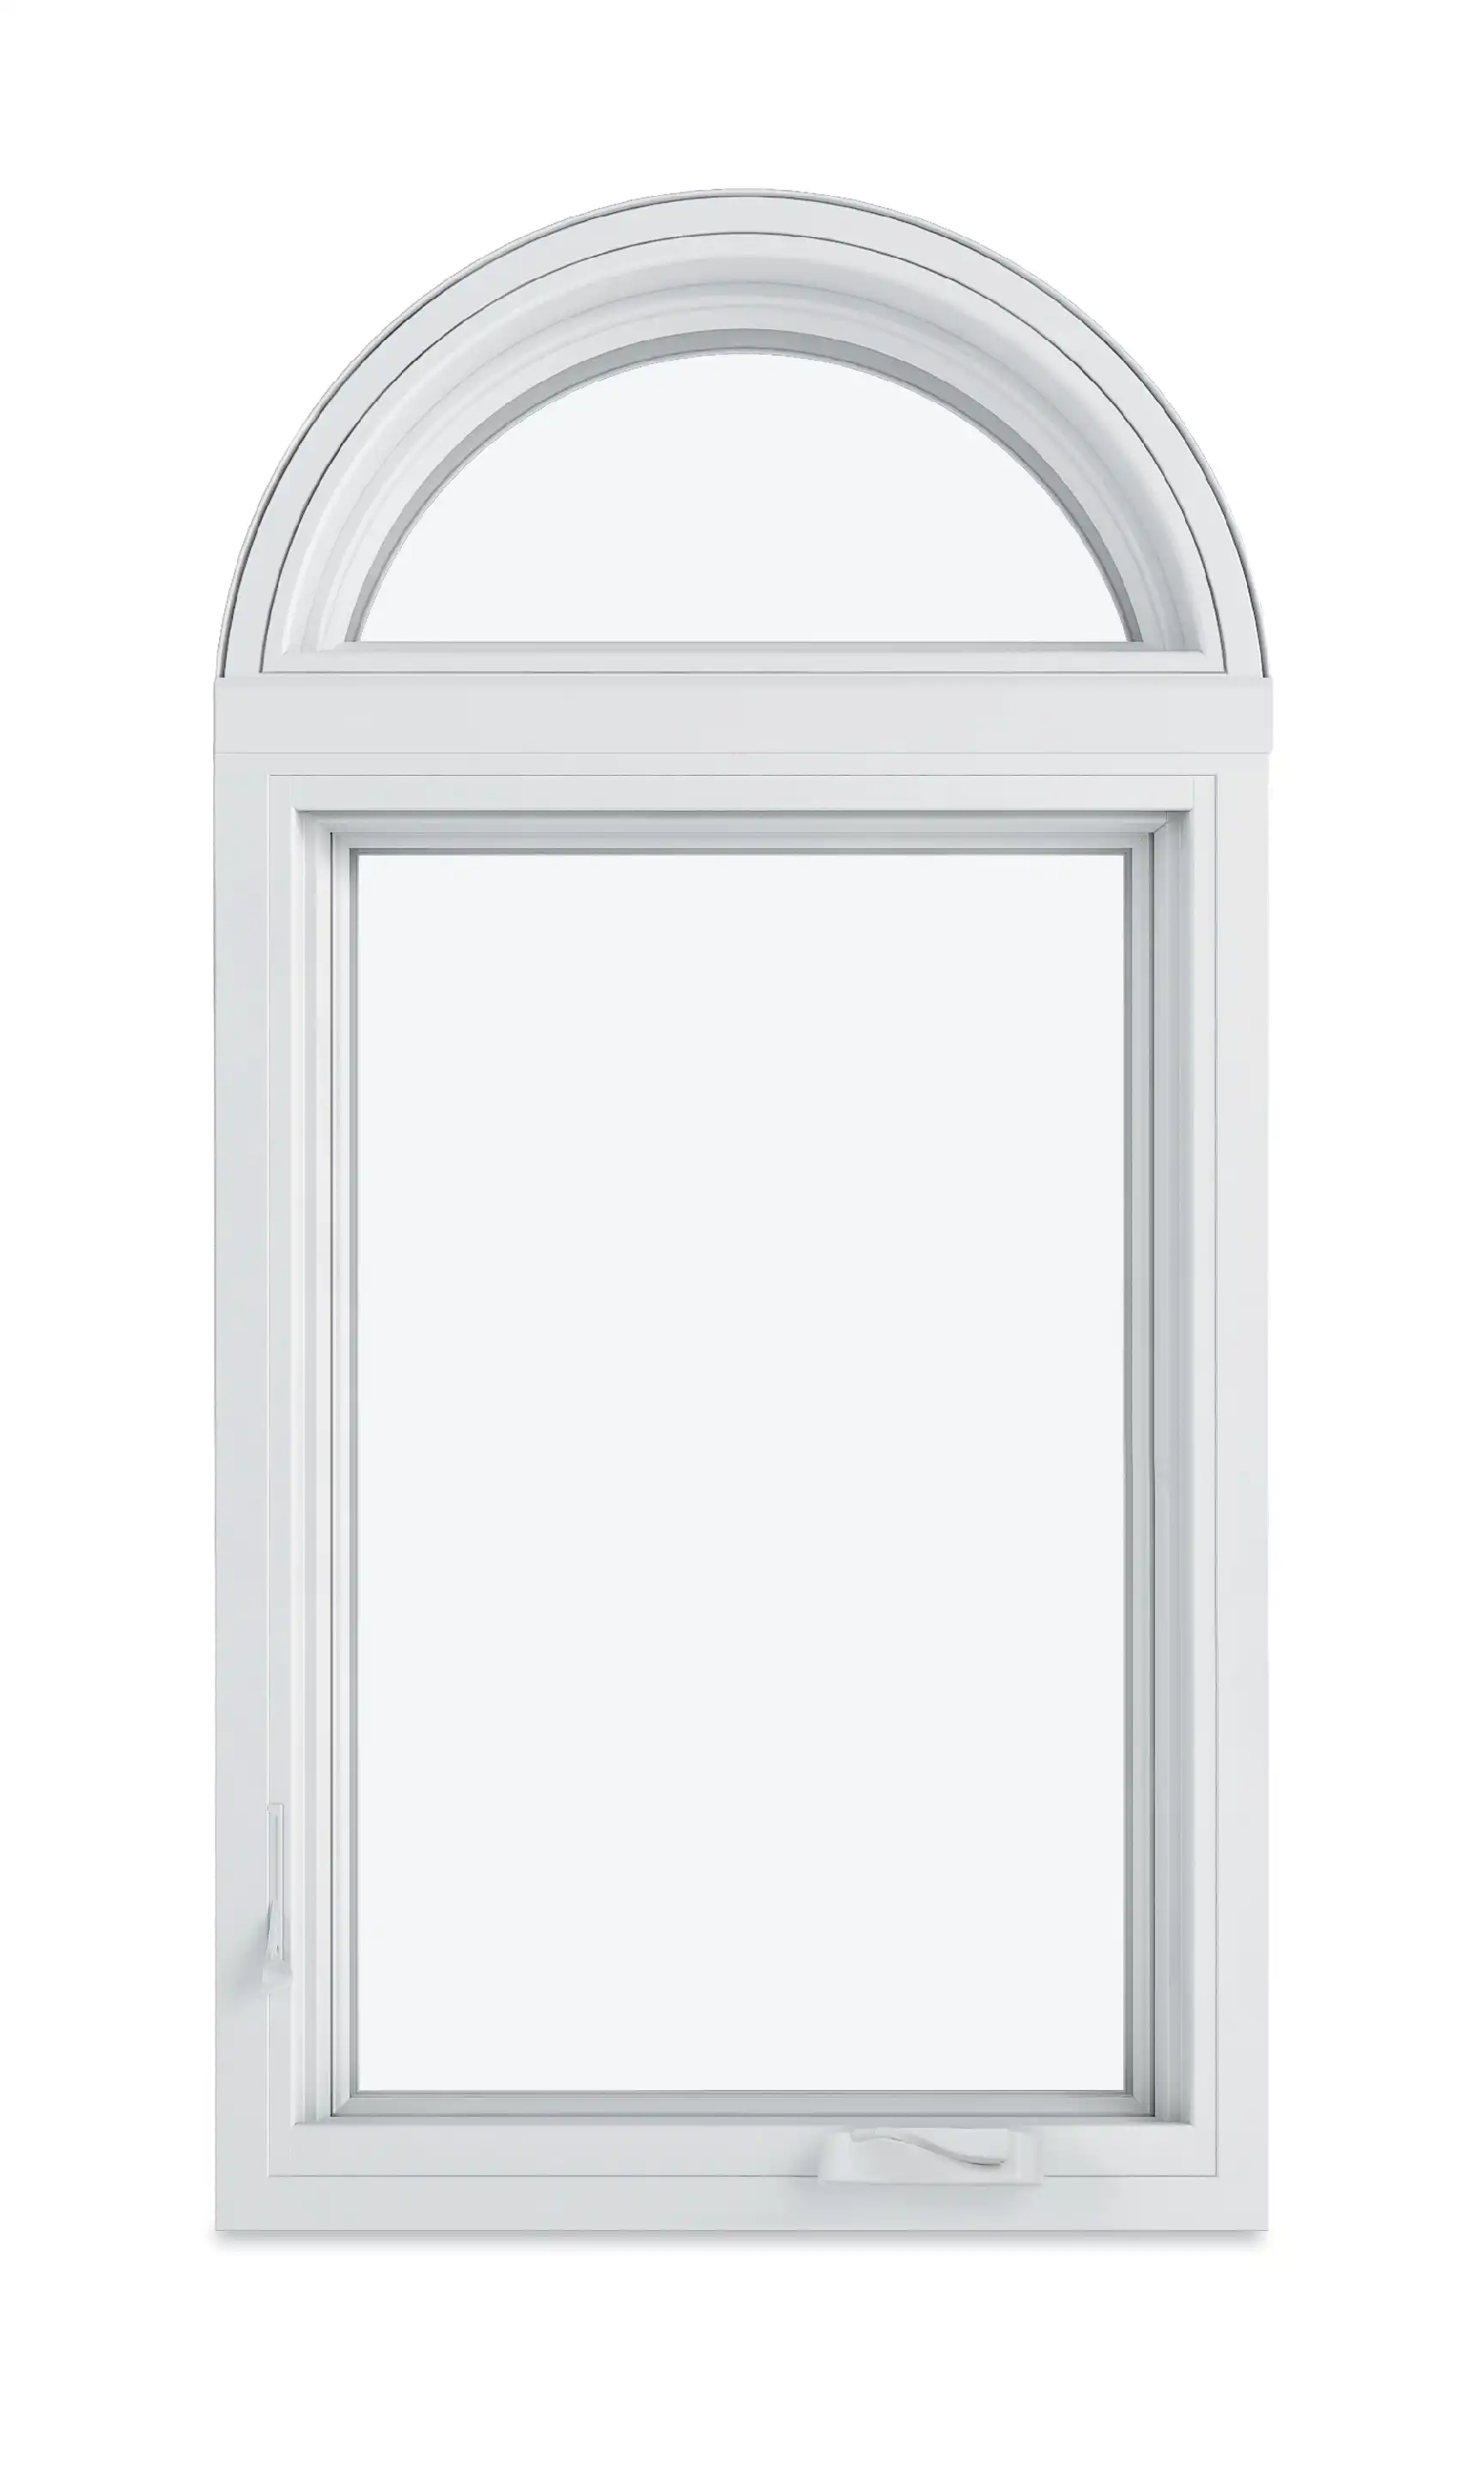 Image of a white Marvin Replacement Casement window with a half Round Top window above.